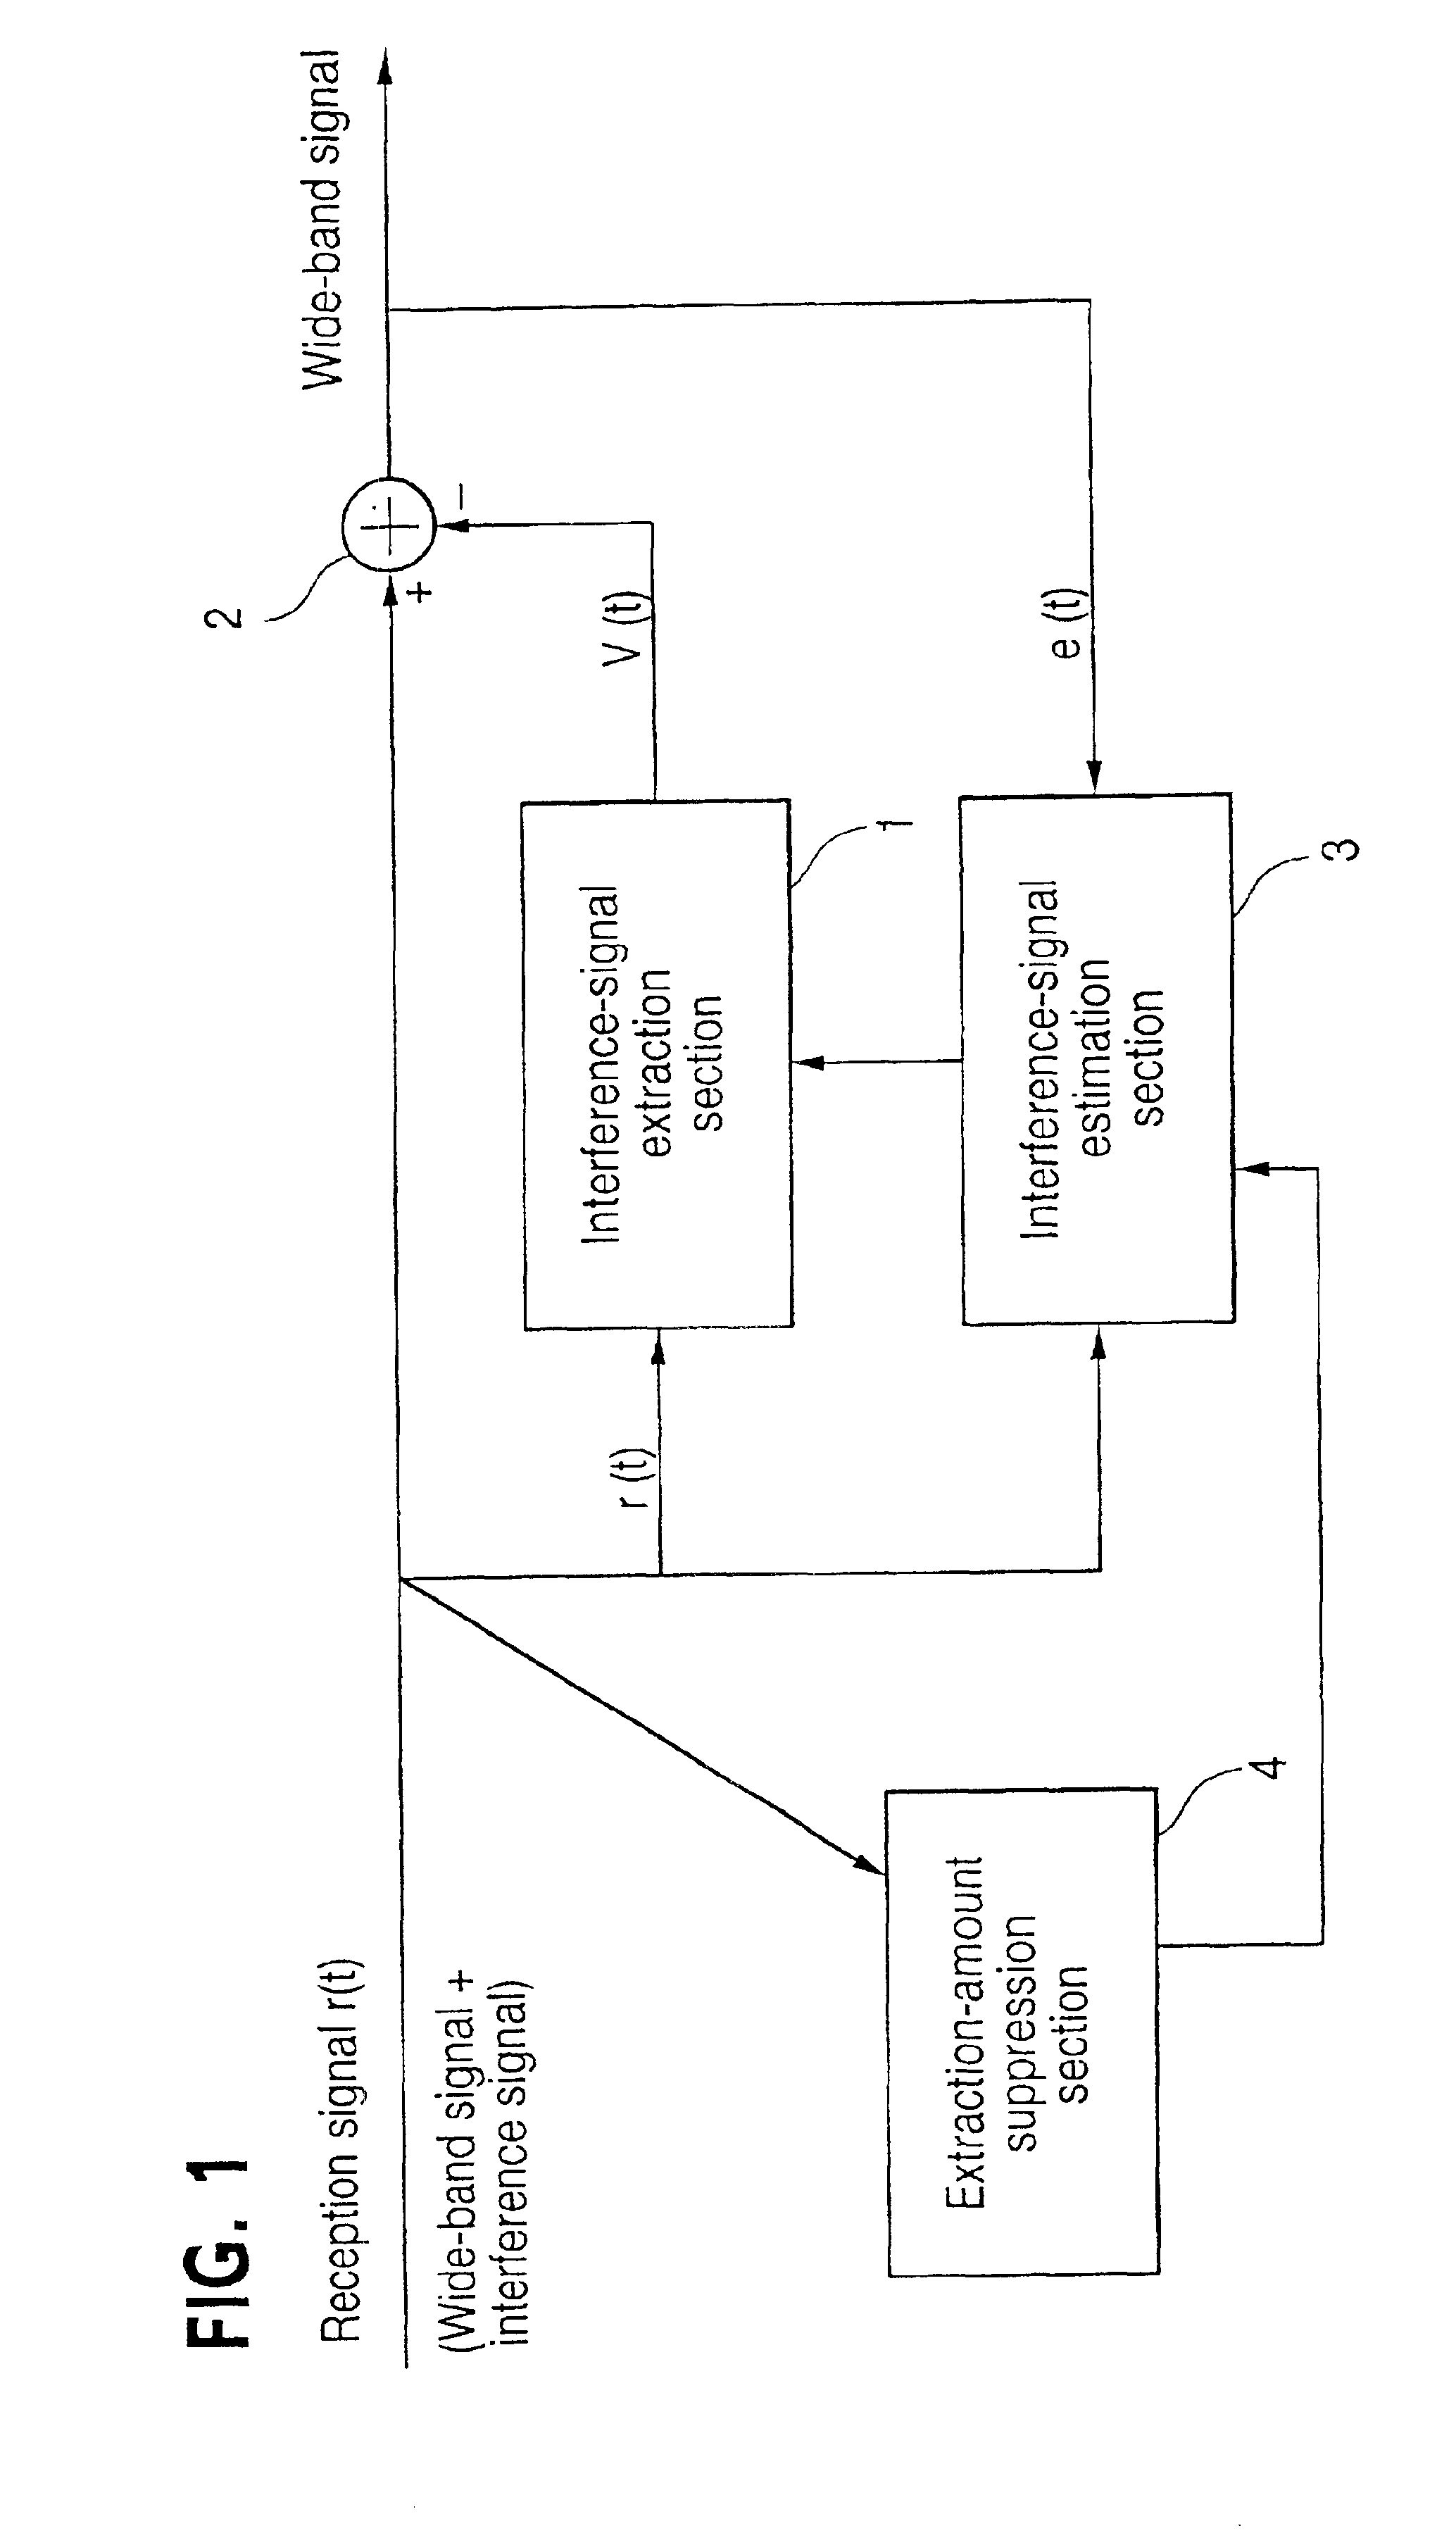 Interference-signal removing apparatus